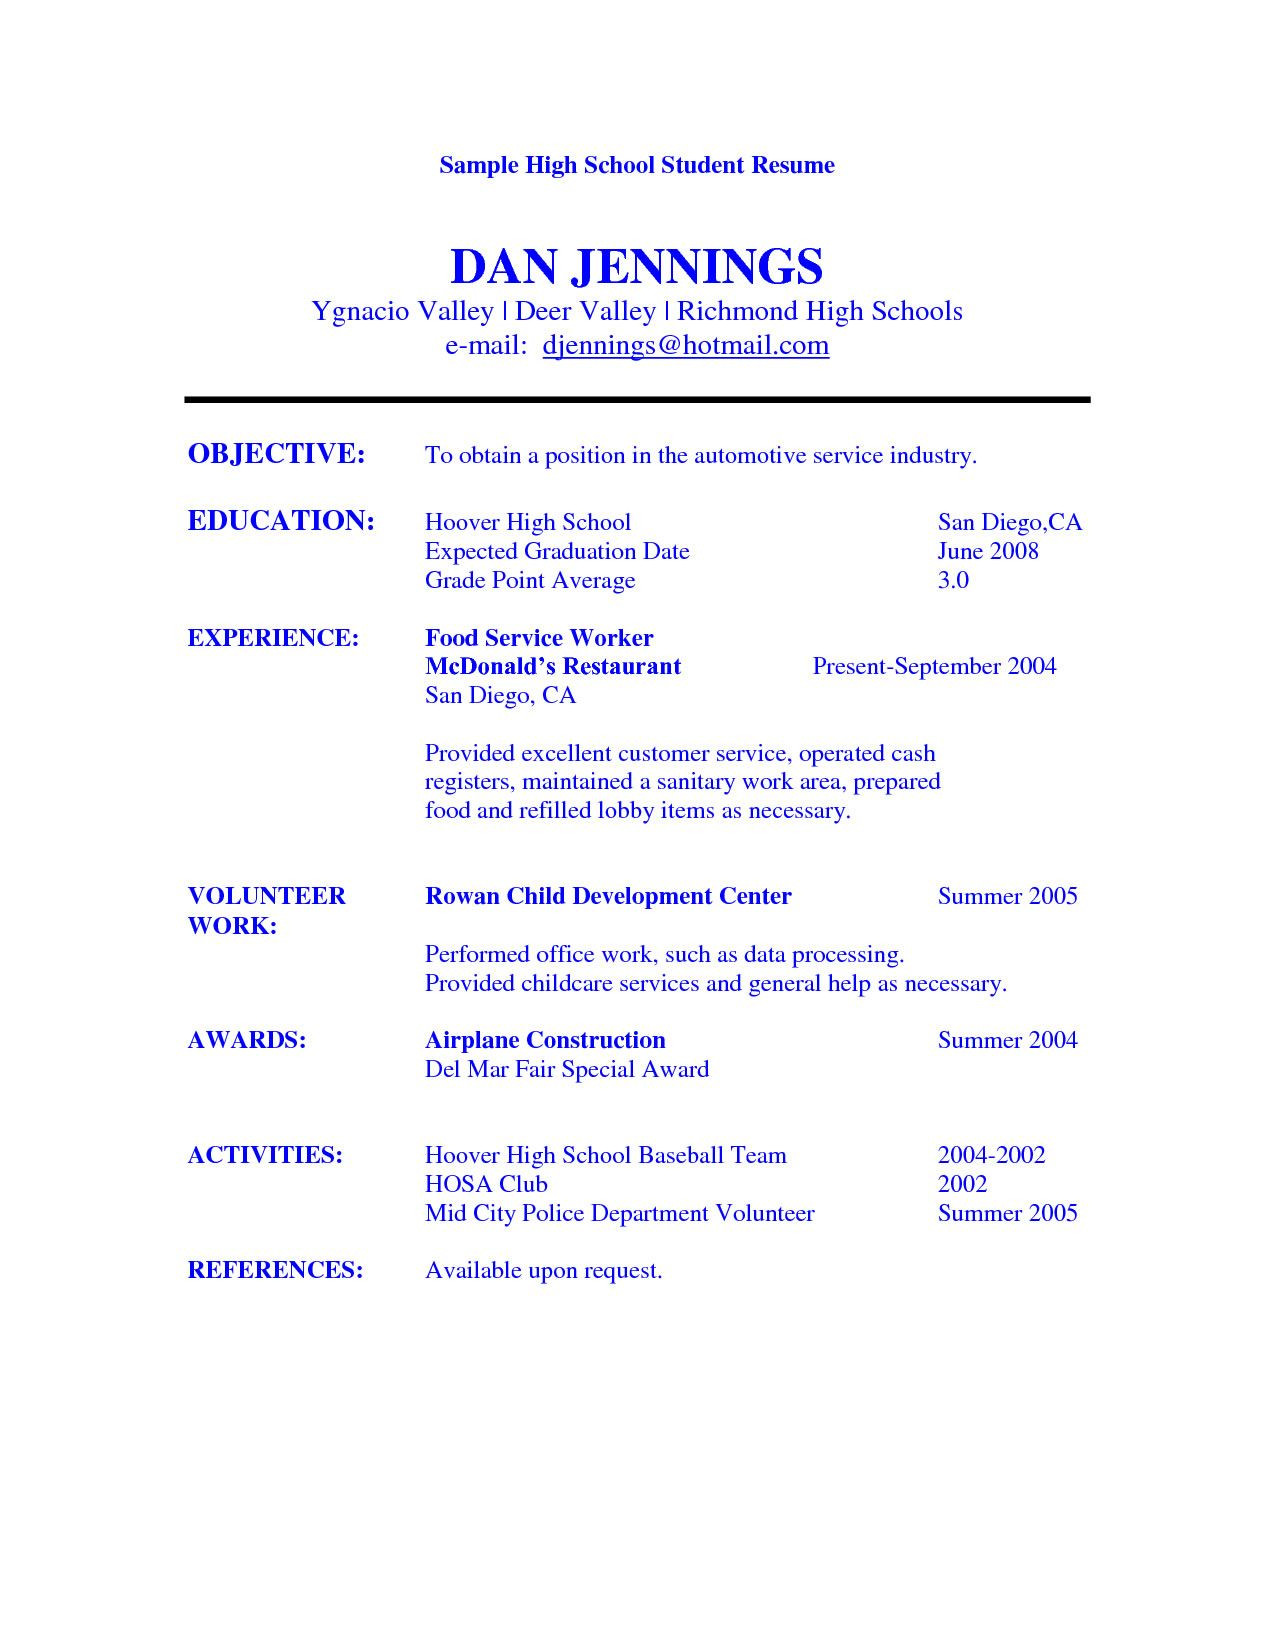 Sample Objective for Resume for High School Student 11 Amazing High School Student Resume Objective Picture …